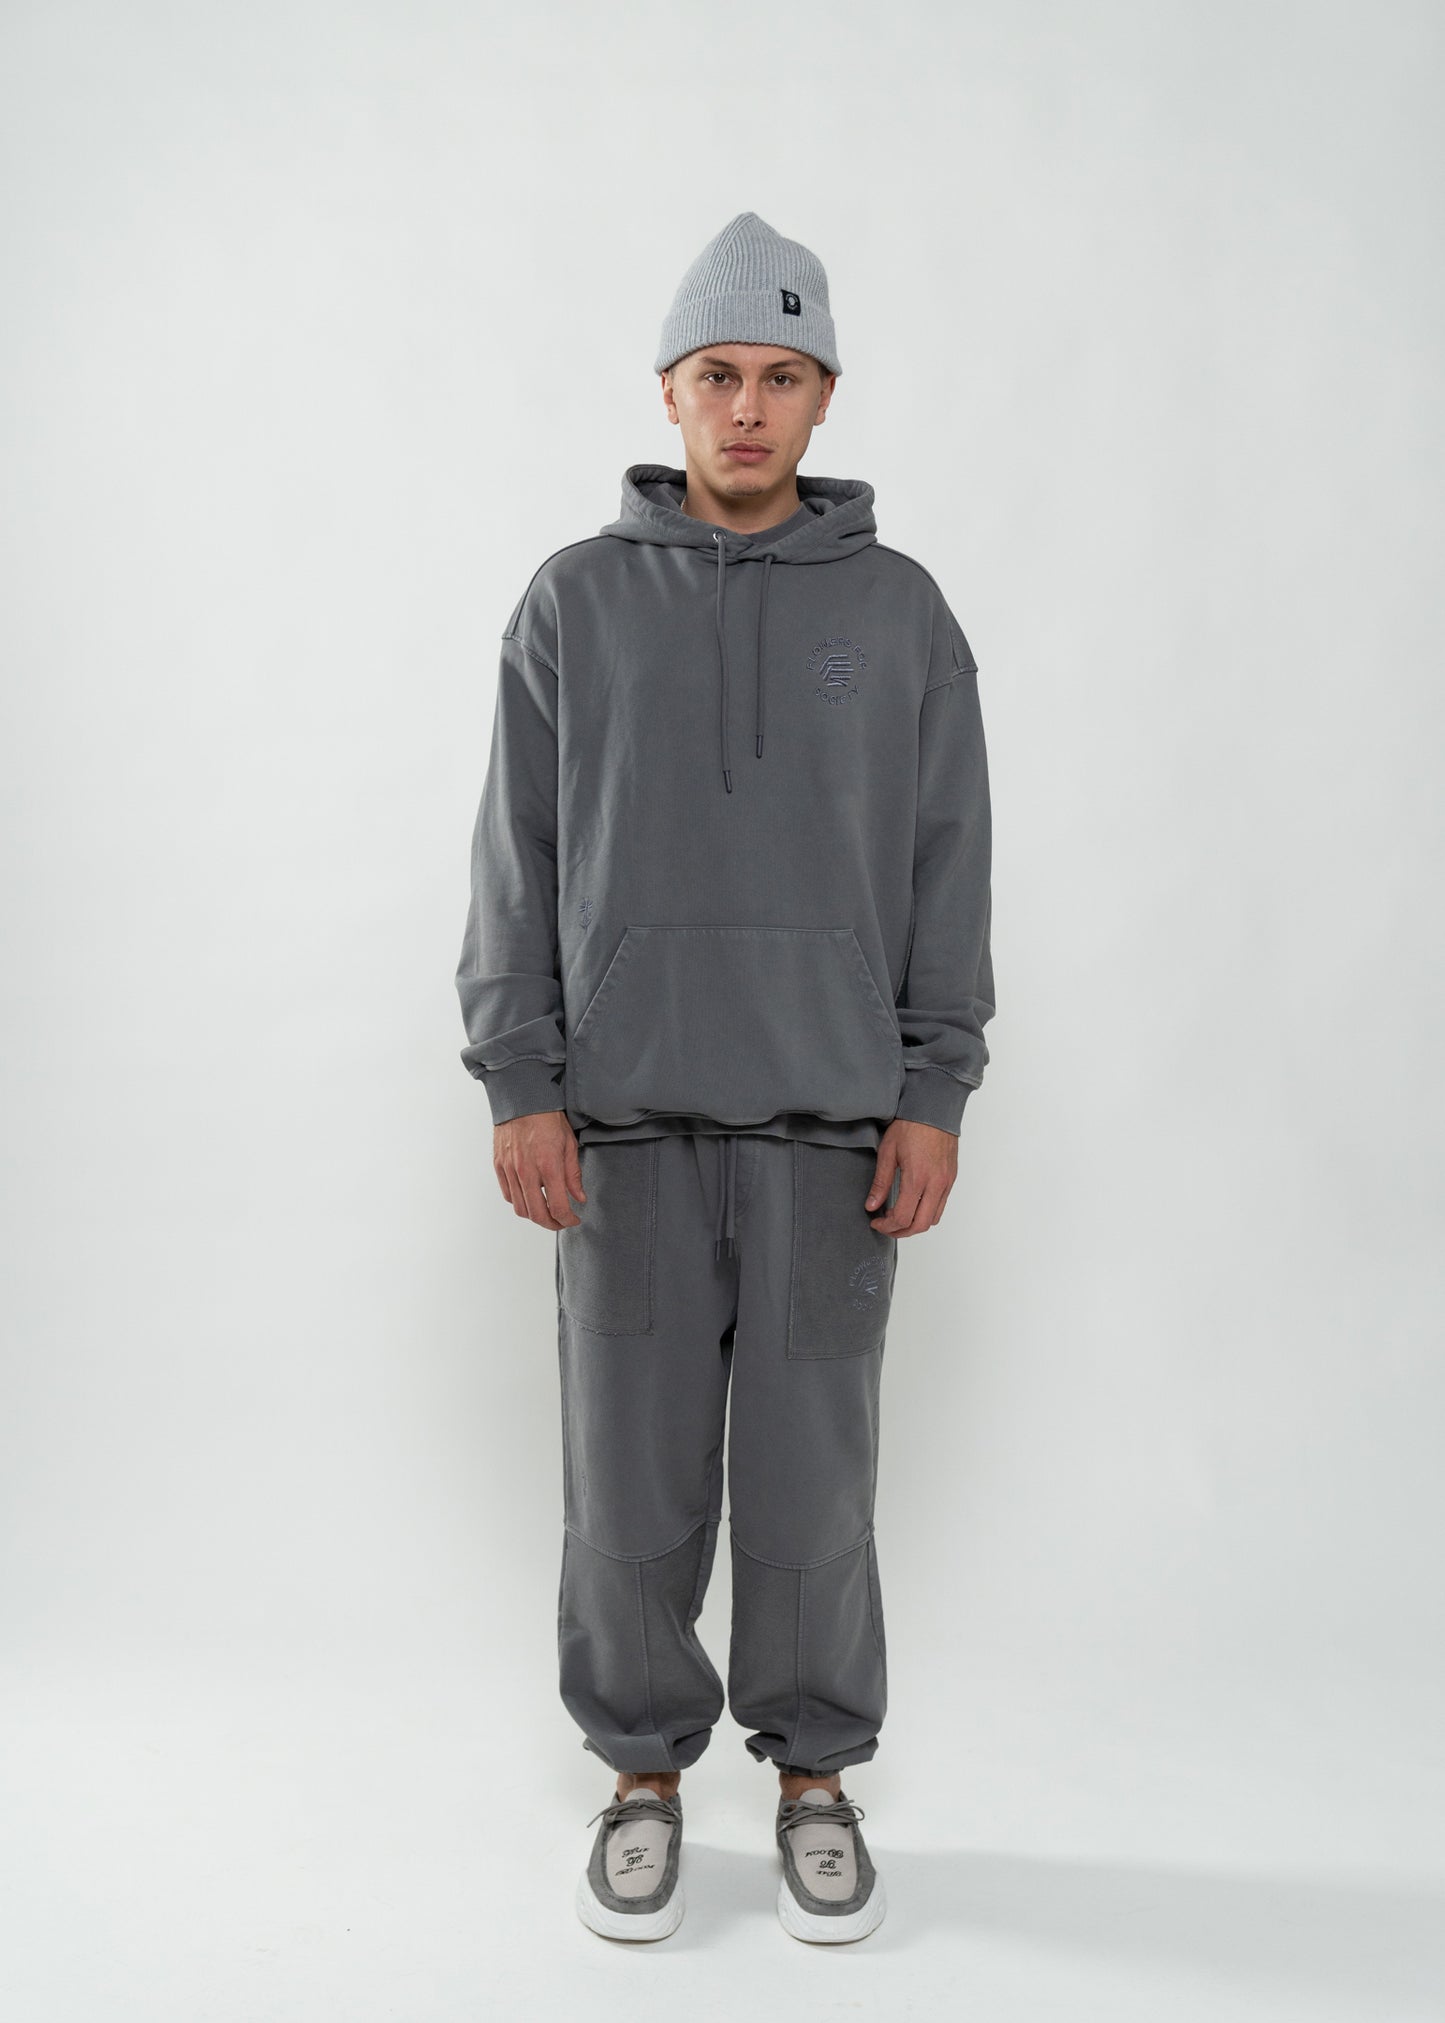 Flowers for Society Basic Jogger pant washed grey frontview worn by model Ben standing